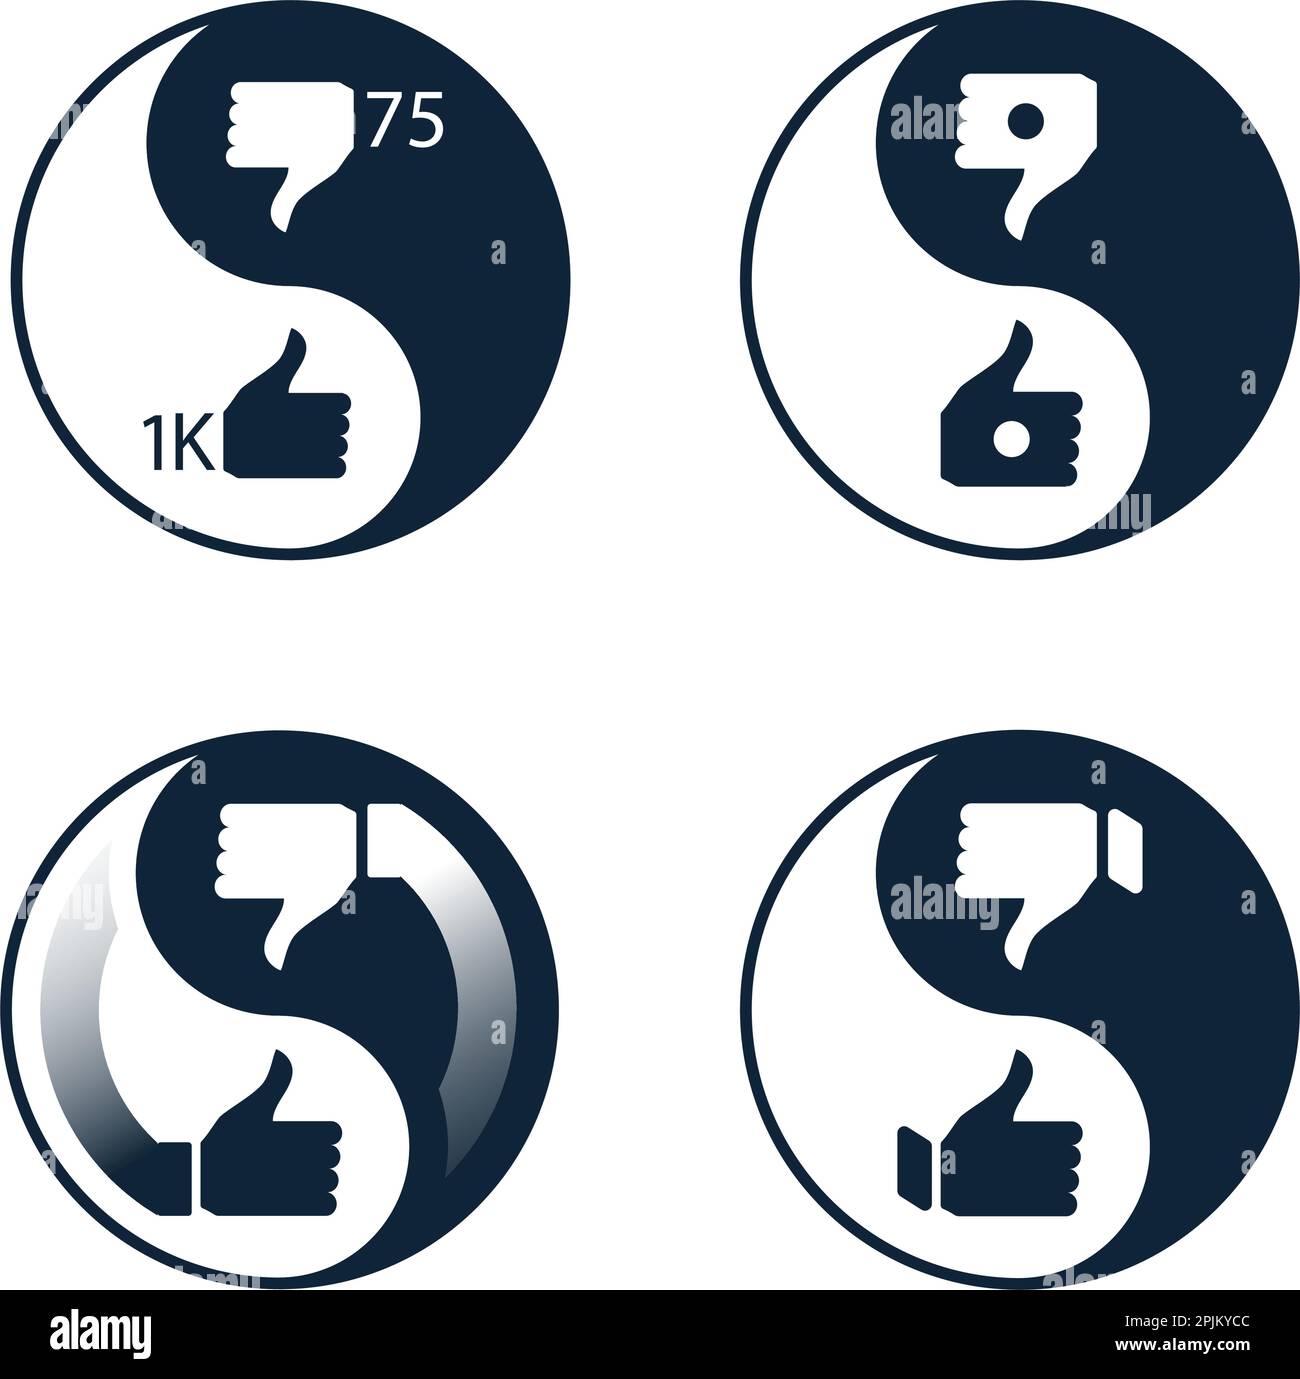 Set of social media or social network like icons. Like and dislike inside yin yang symbol. Illustration of social vote and opinions about post, video Stock Vector